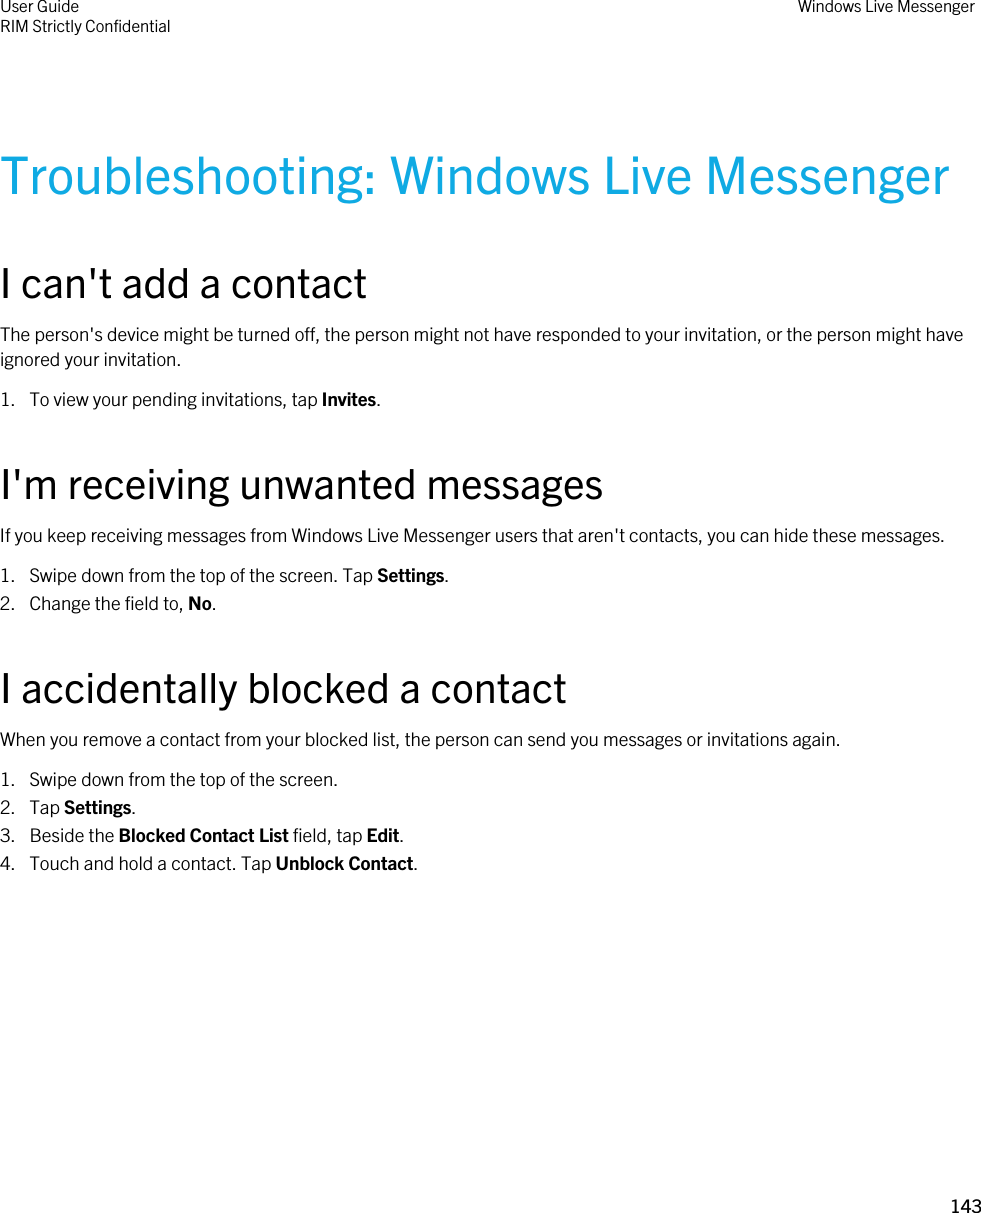 Troubleshooting: Windows Live MessengerI can&apos;t add a contactThe person&apos;s device might be turned off, the person might not have responded to your invitation, or the person might have ignored your invitation.1. To view your pending invitations, tap Invites.I&apos;m receiving unwanted messagesIf you keep receiving messages from Windows Live Messenger users that aren&apos;t contacts, you can hide these messages.1. Swipe down from the top of the screen. Tap Settings.2. Change the field to, No.I accidentally blocked a contactWhen you remove a contact from your blocked list, the person can send you messages or invitations again.1. Swipe down from the top of the screen.2. Tap Settings.3. Beside the Blocked Contact List field, tap Edit.4. Touch and hold a contact. Tap Unblock Contact.User GuideRIM Strictly Confidential Windows Live Messenger143 